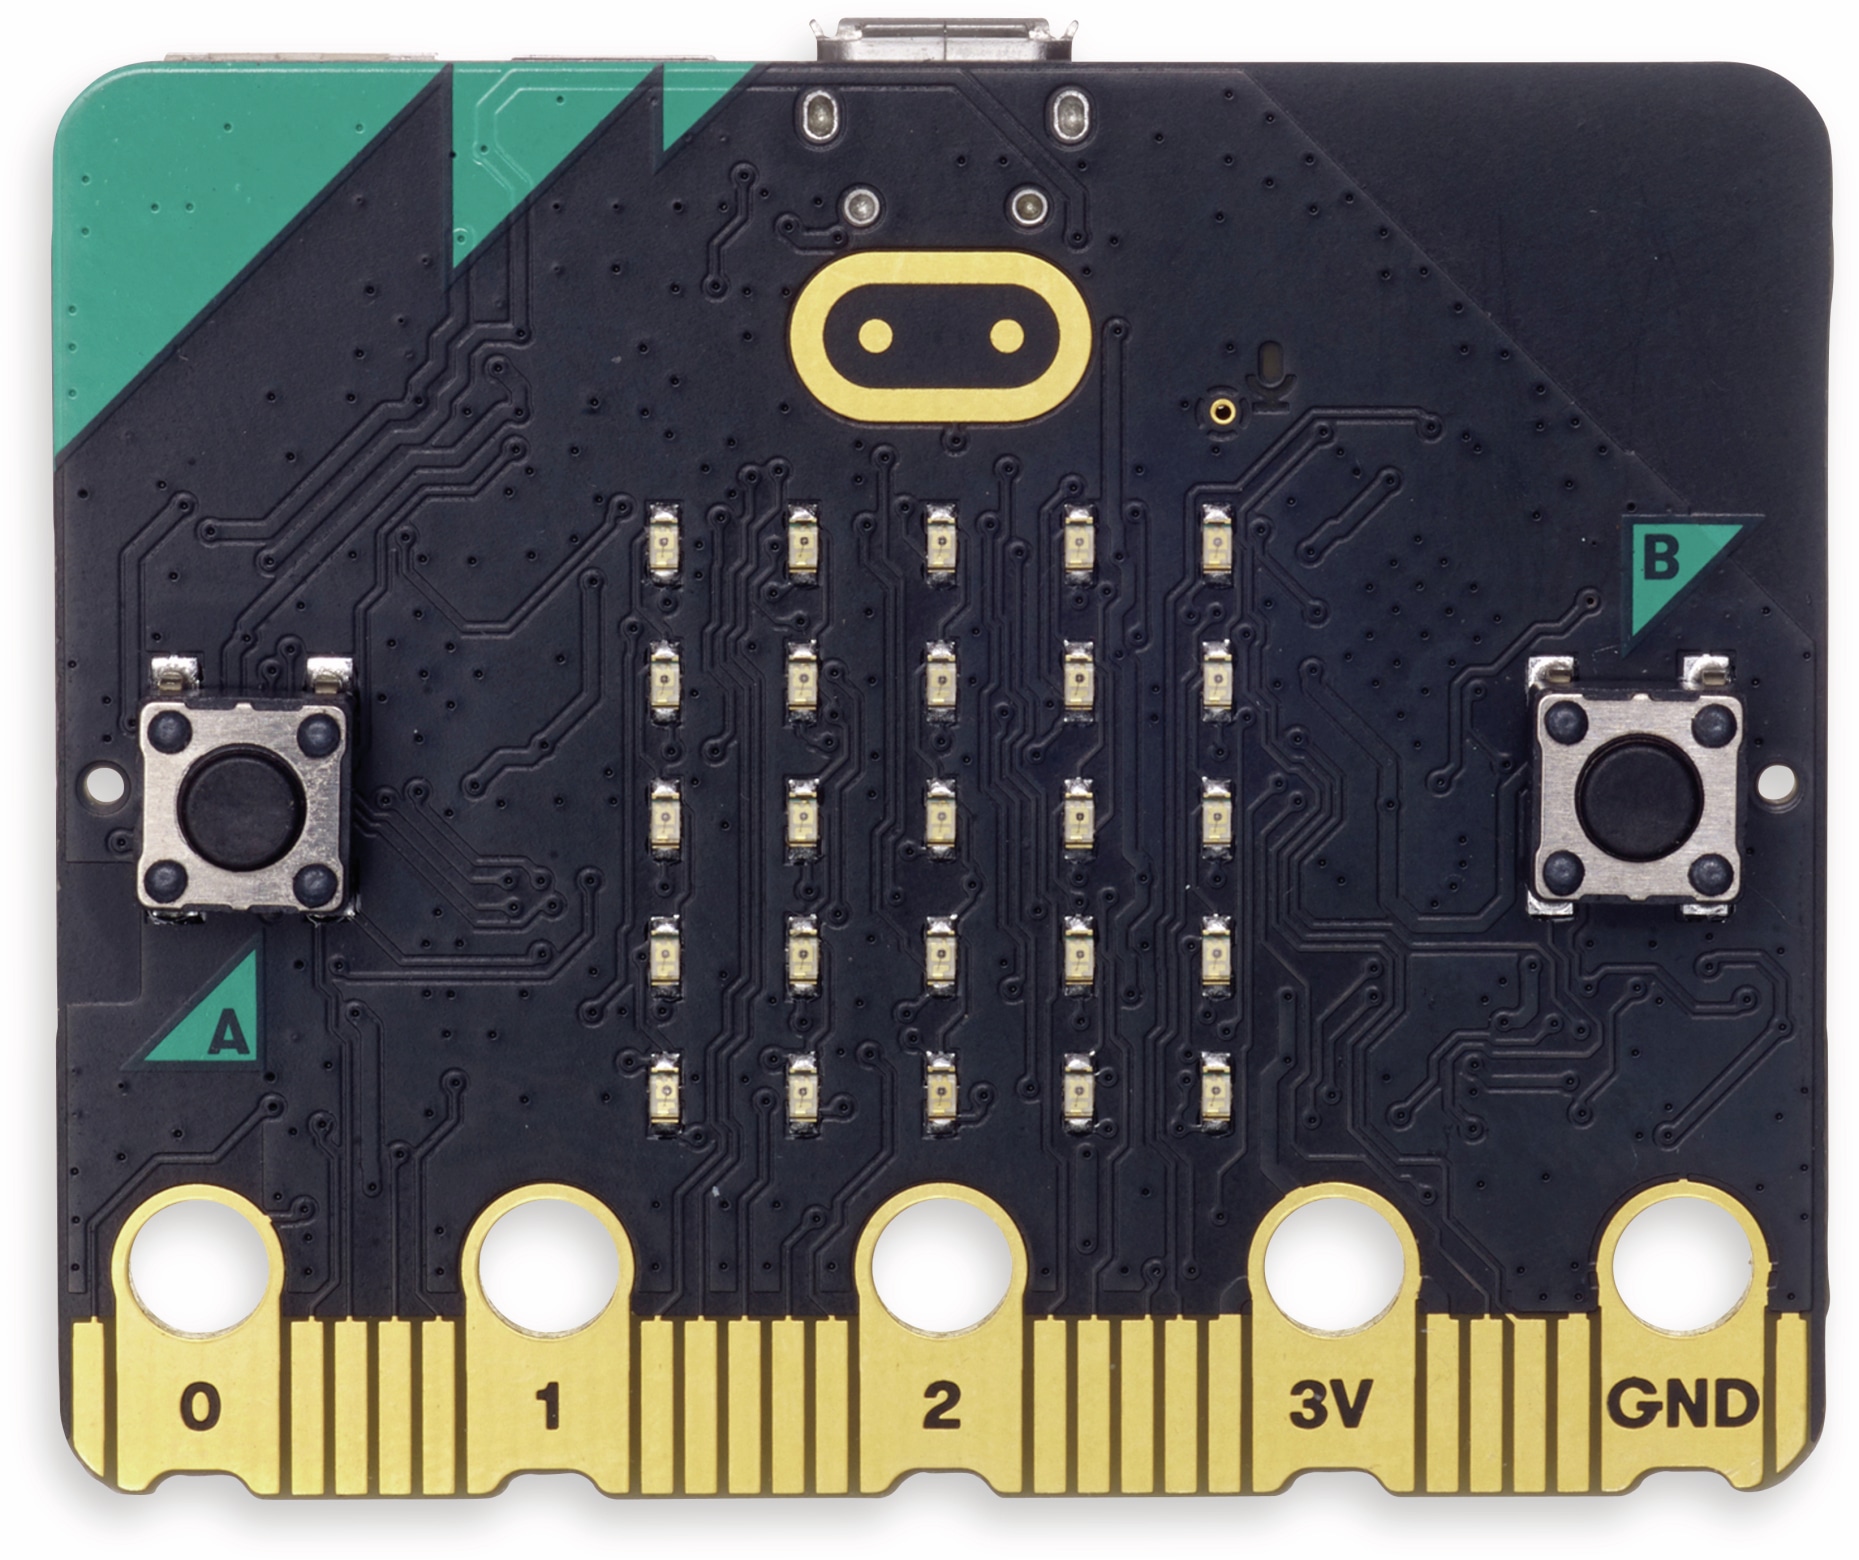 BBC MICRO:BIT Micro:bit, BBC Micro Bit 2 Go Set, MicroBit2GoBoxed